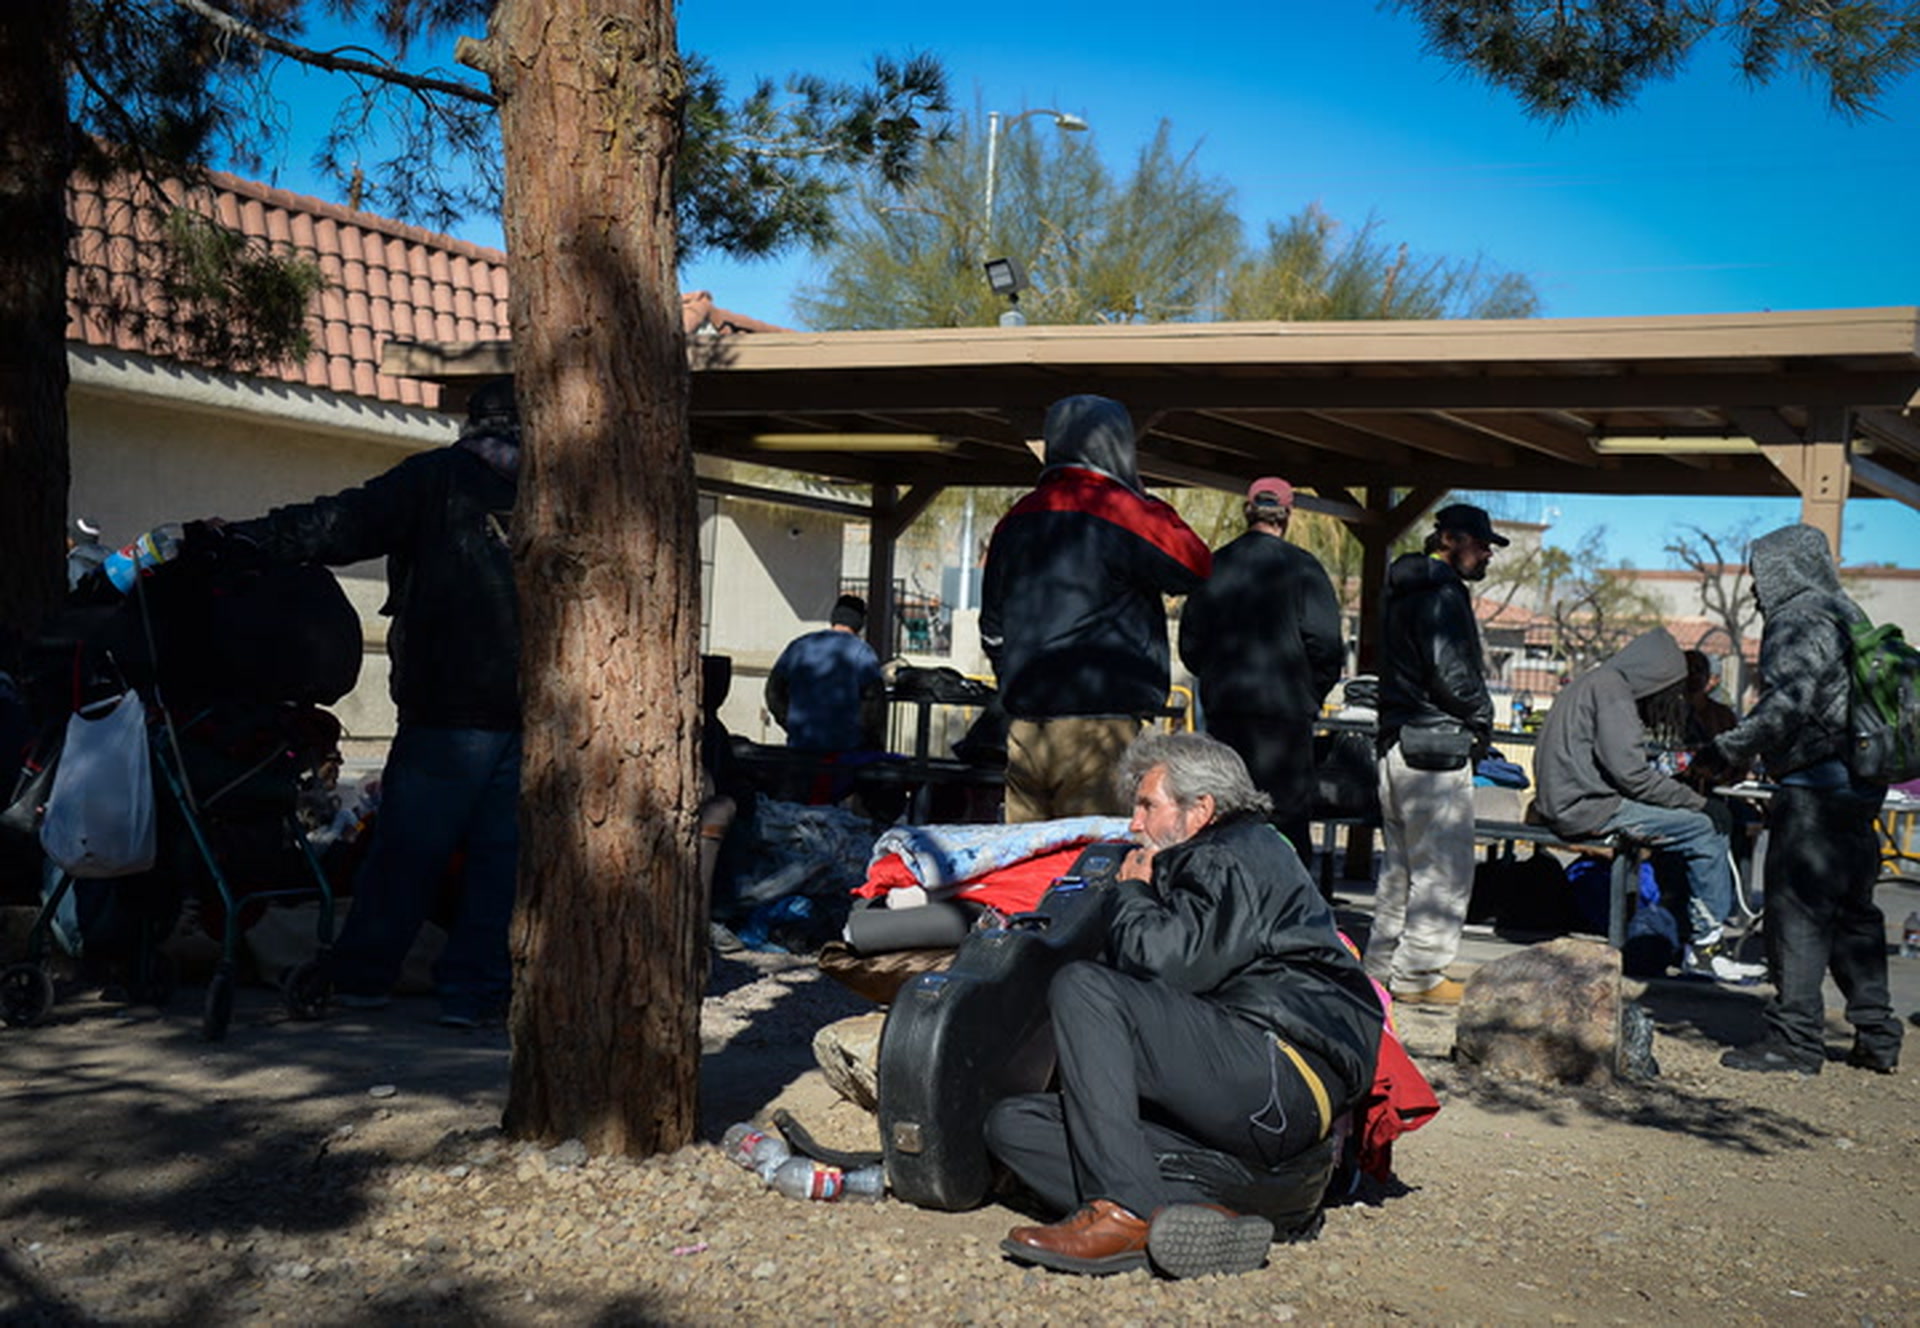 Change approved in how homeless of Southern Nevada counted